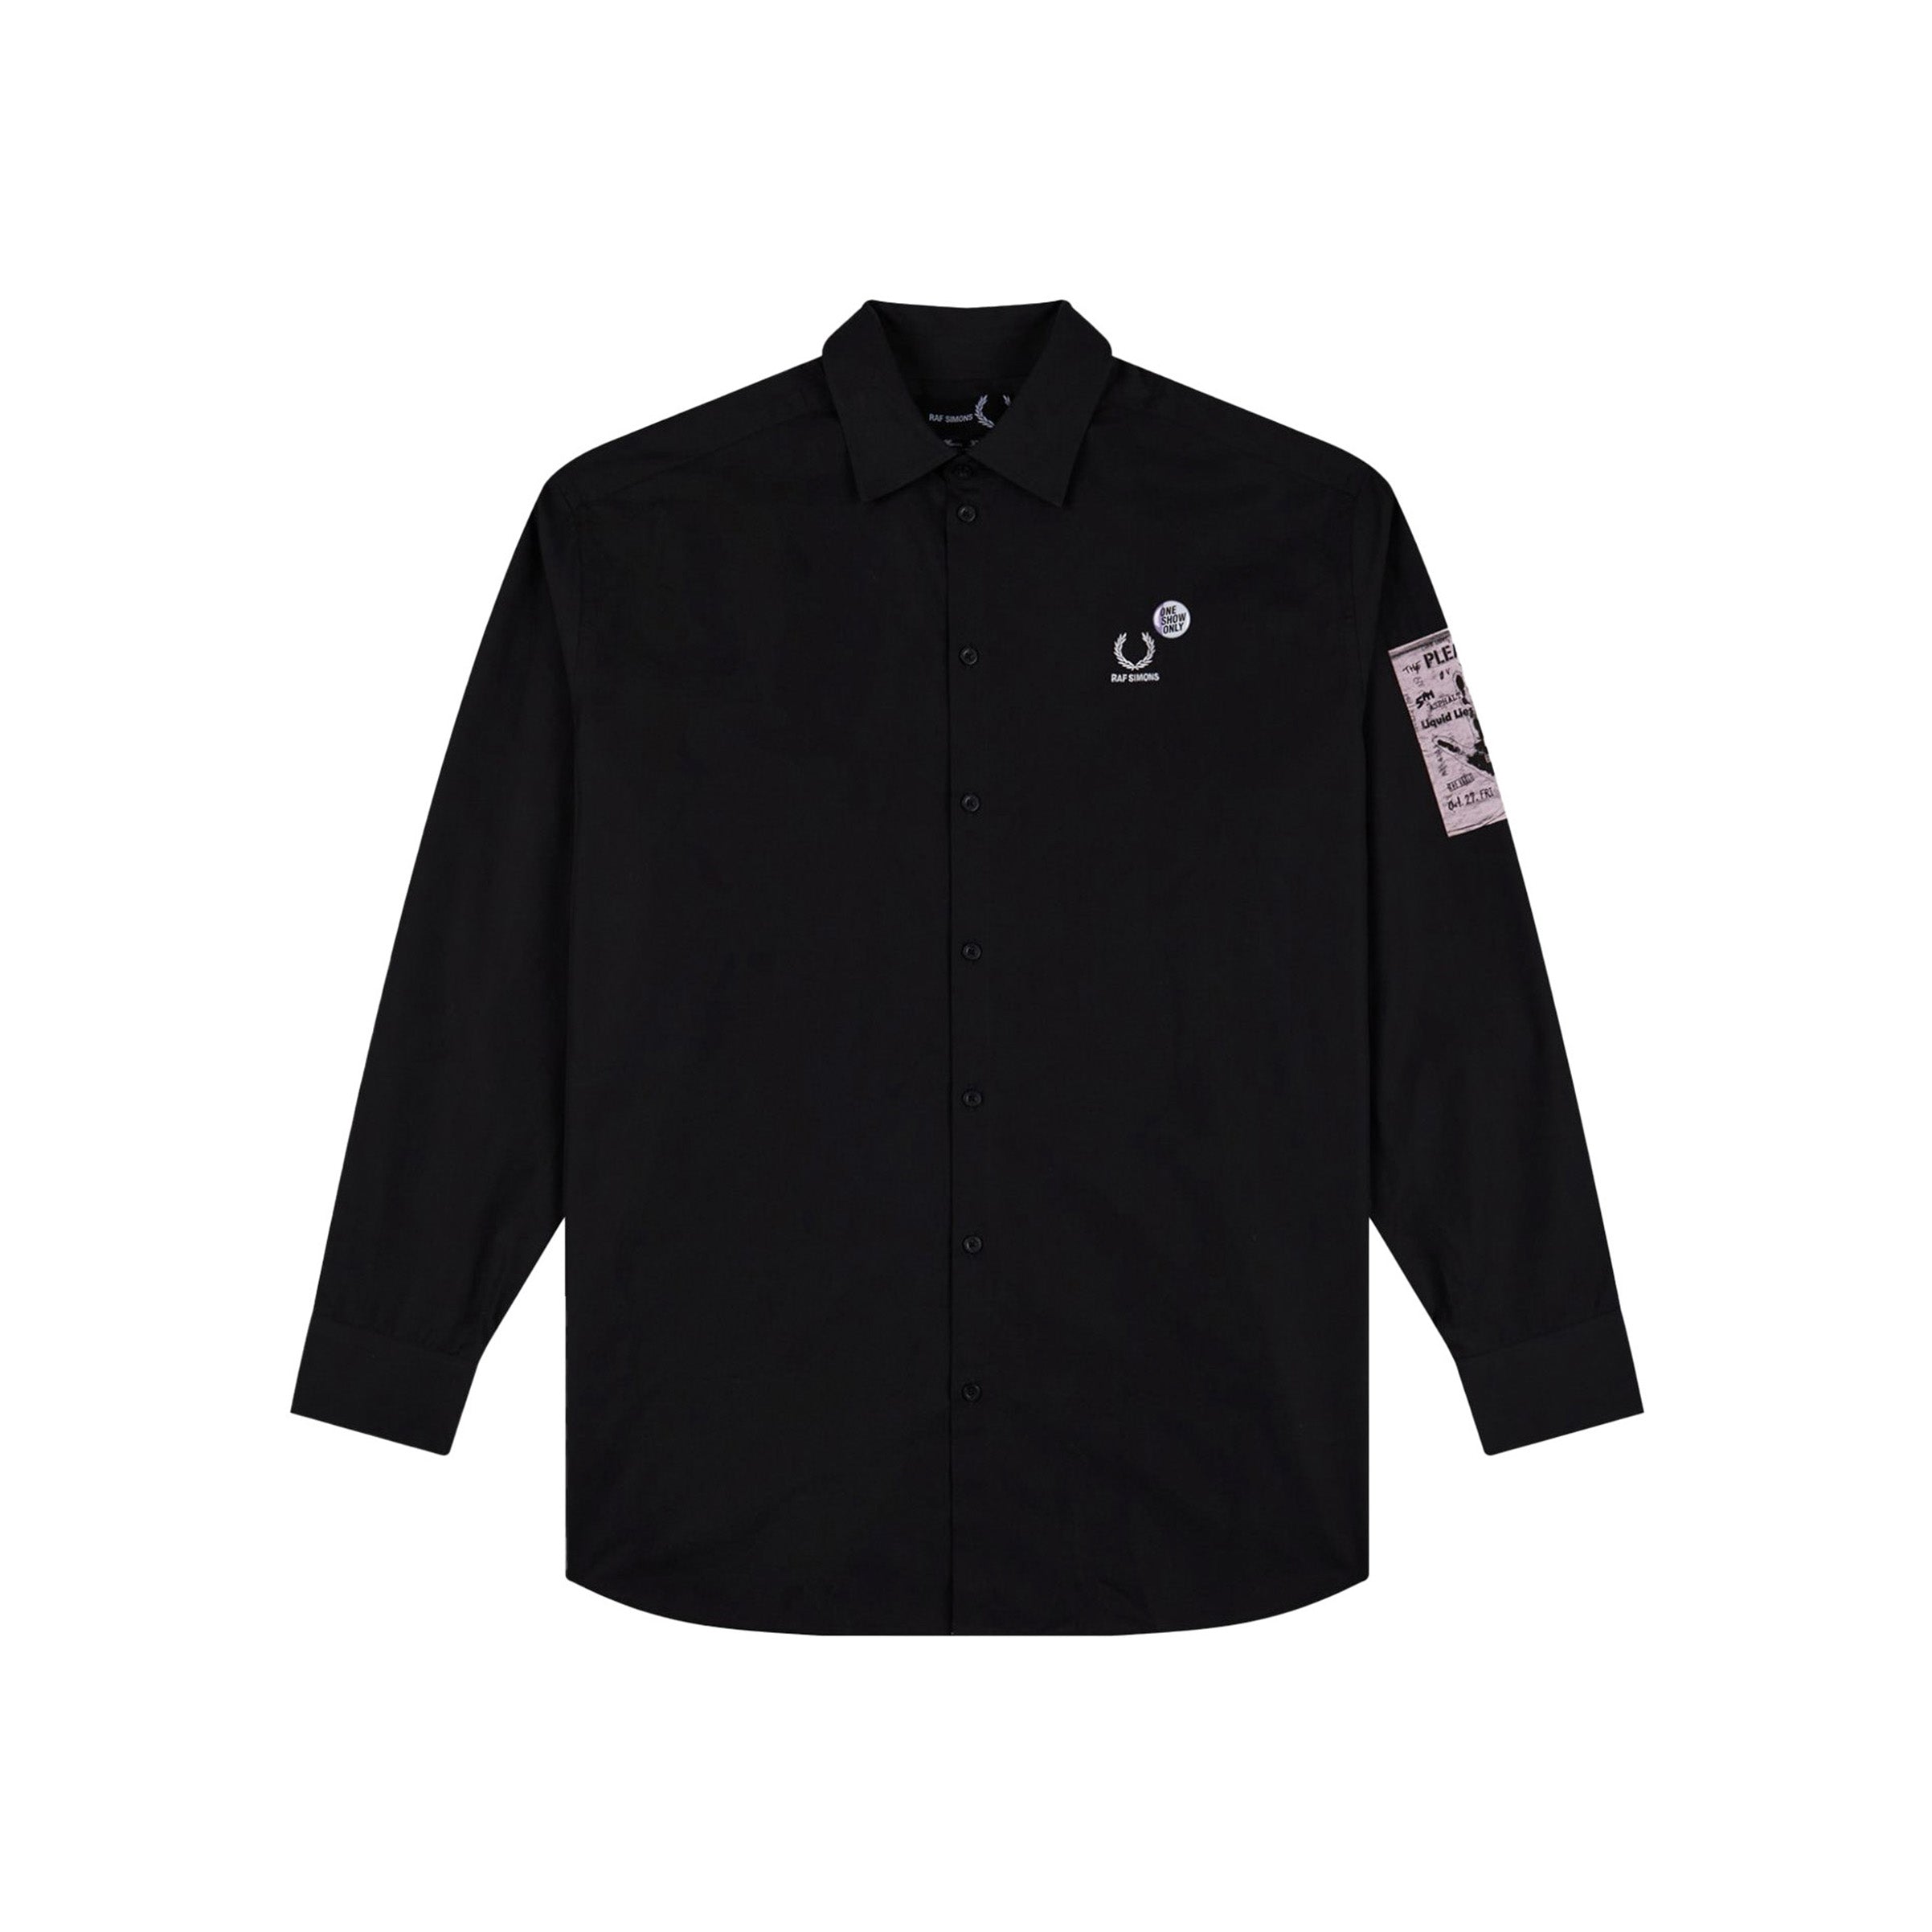 Fred Perry x Raf Simons Back Patch Oversized Shirt Black